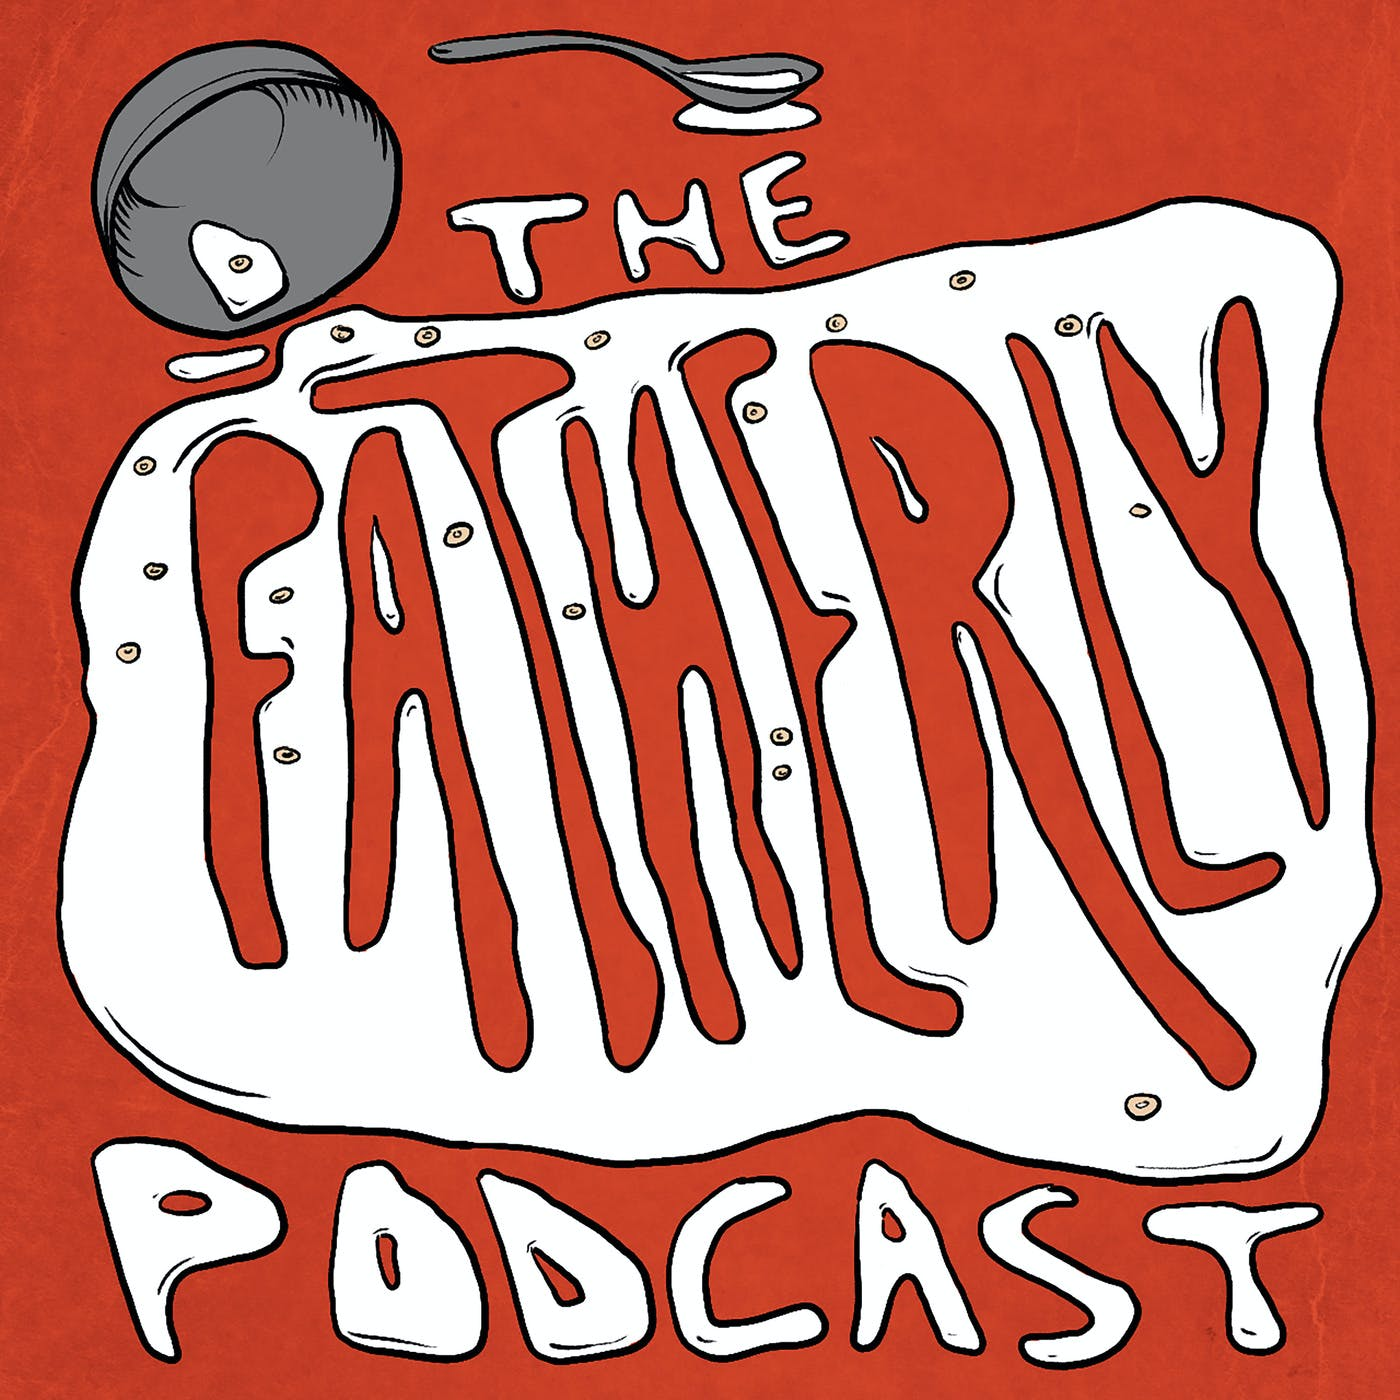 Introducing The Fatherly Podcast